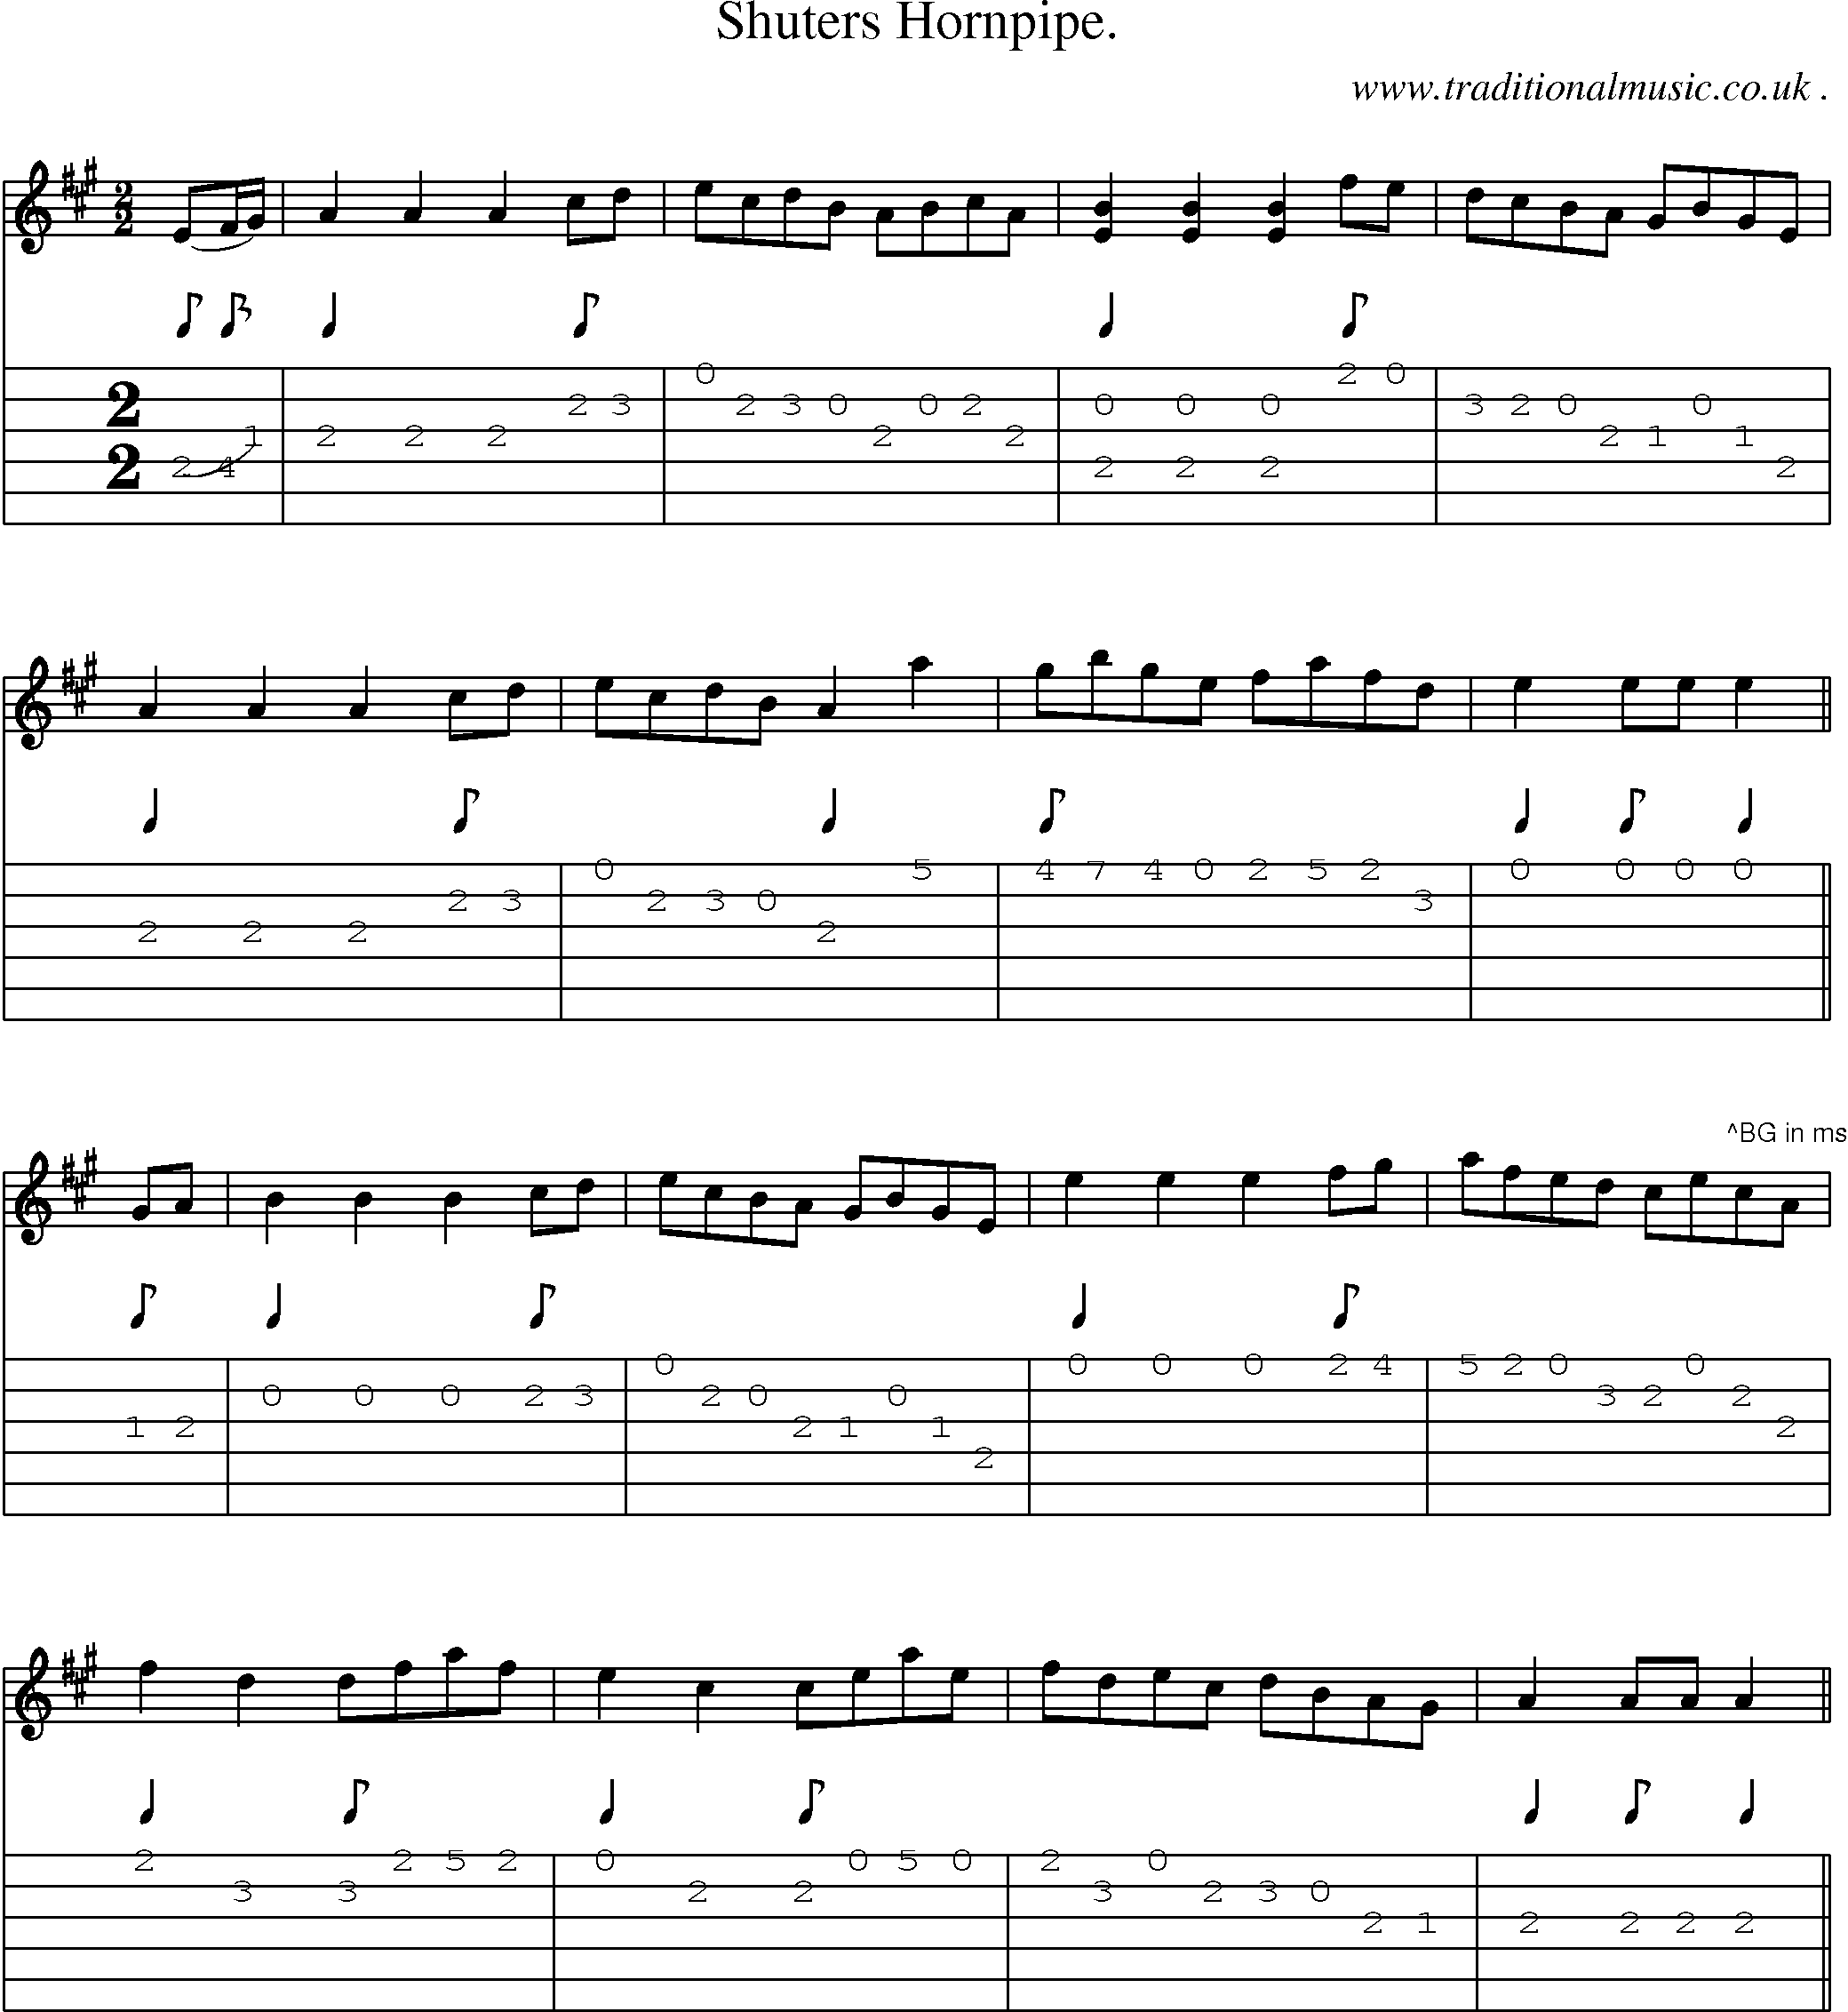 Sheet-Music and Guitar Tabs for Shuters Hornpipe